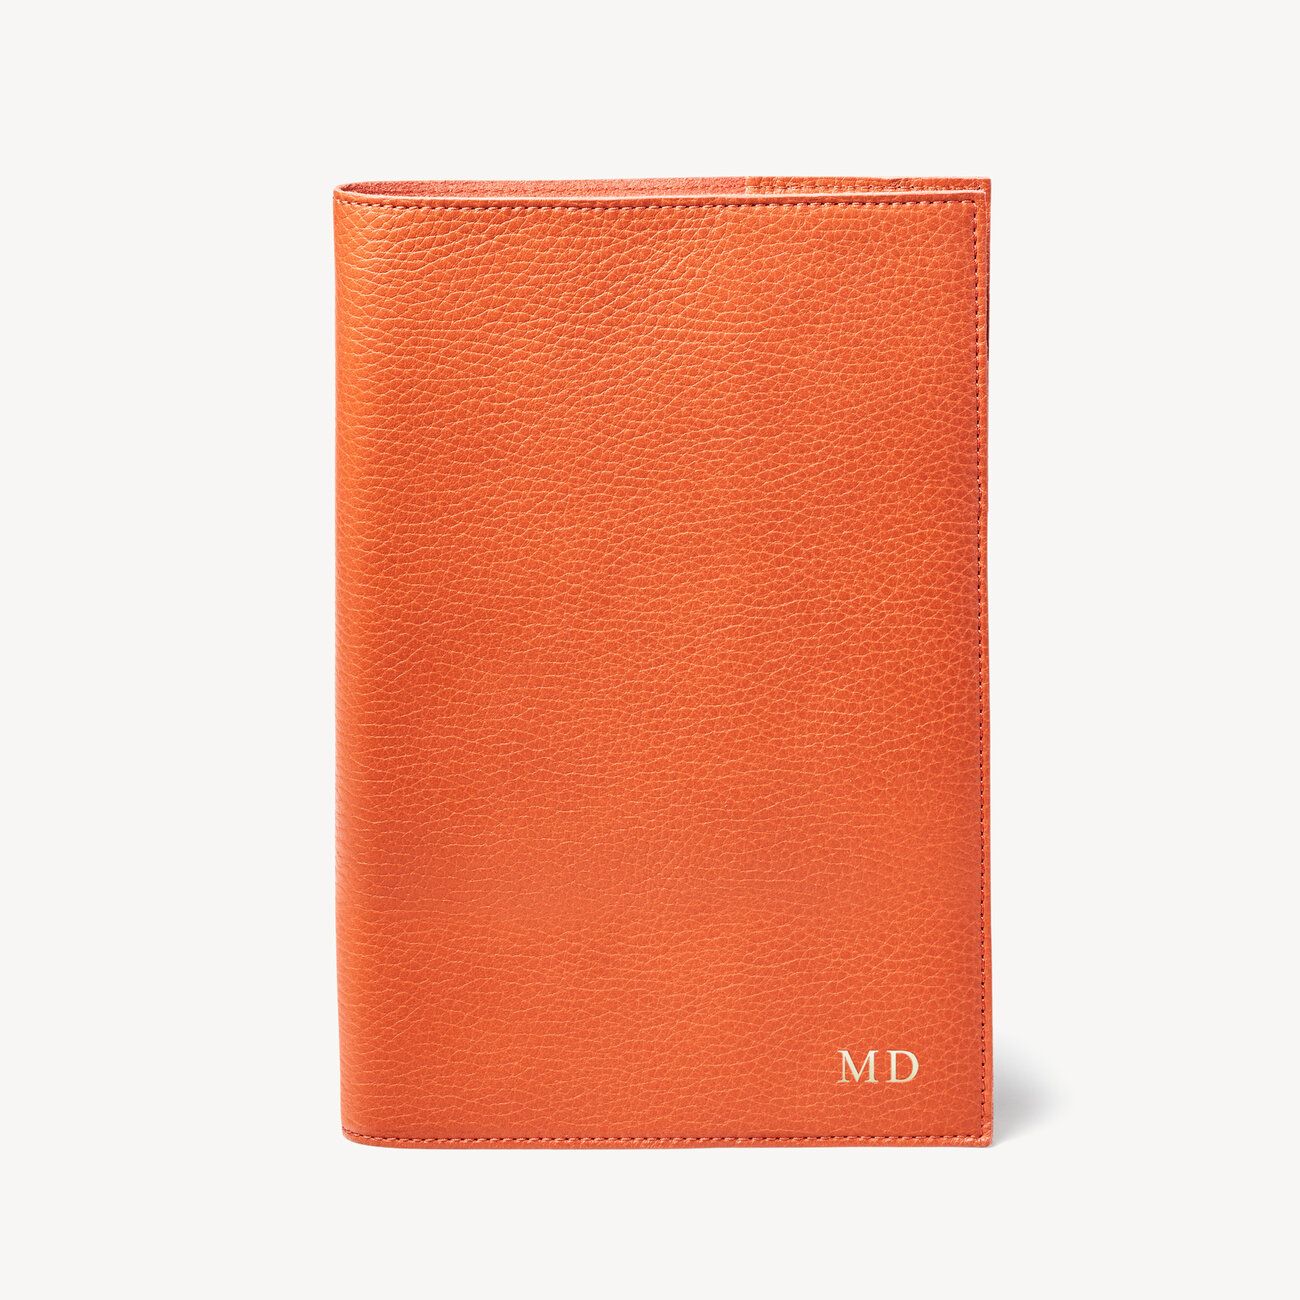 A5 Refillable Leather Journal in Marmalade Pebble | Aspinal of London